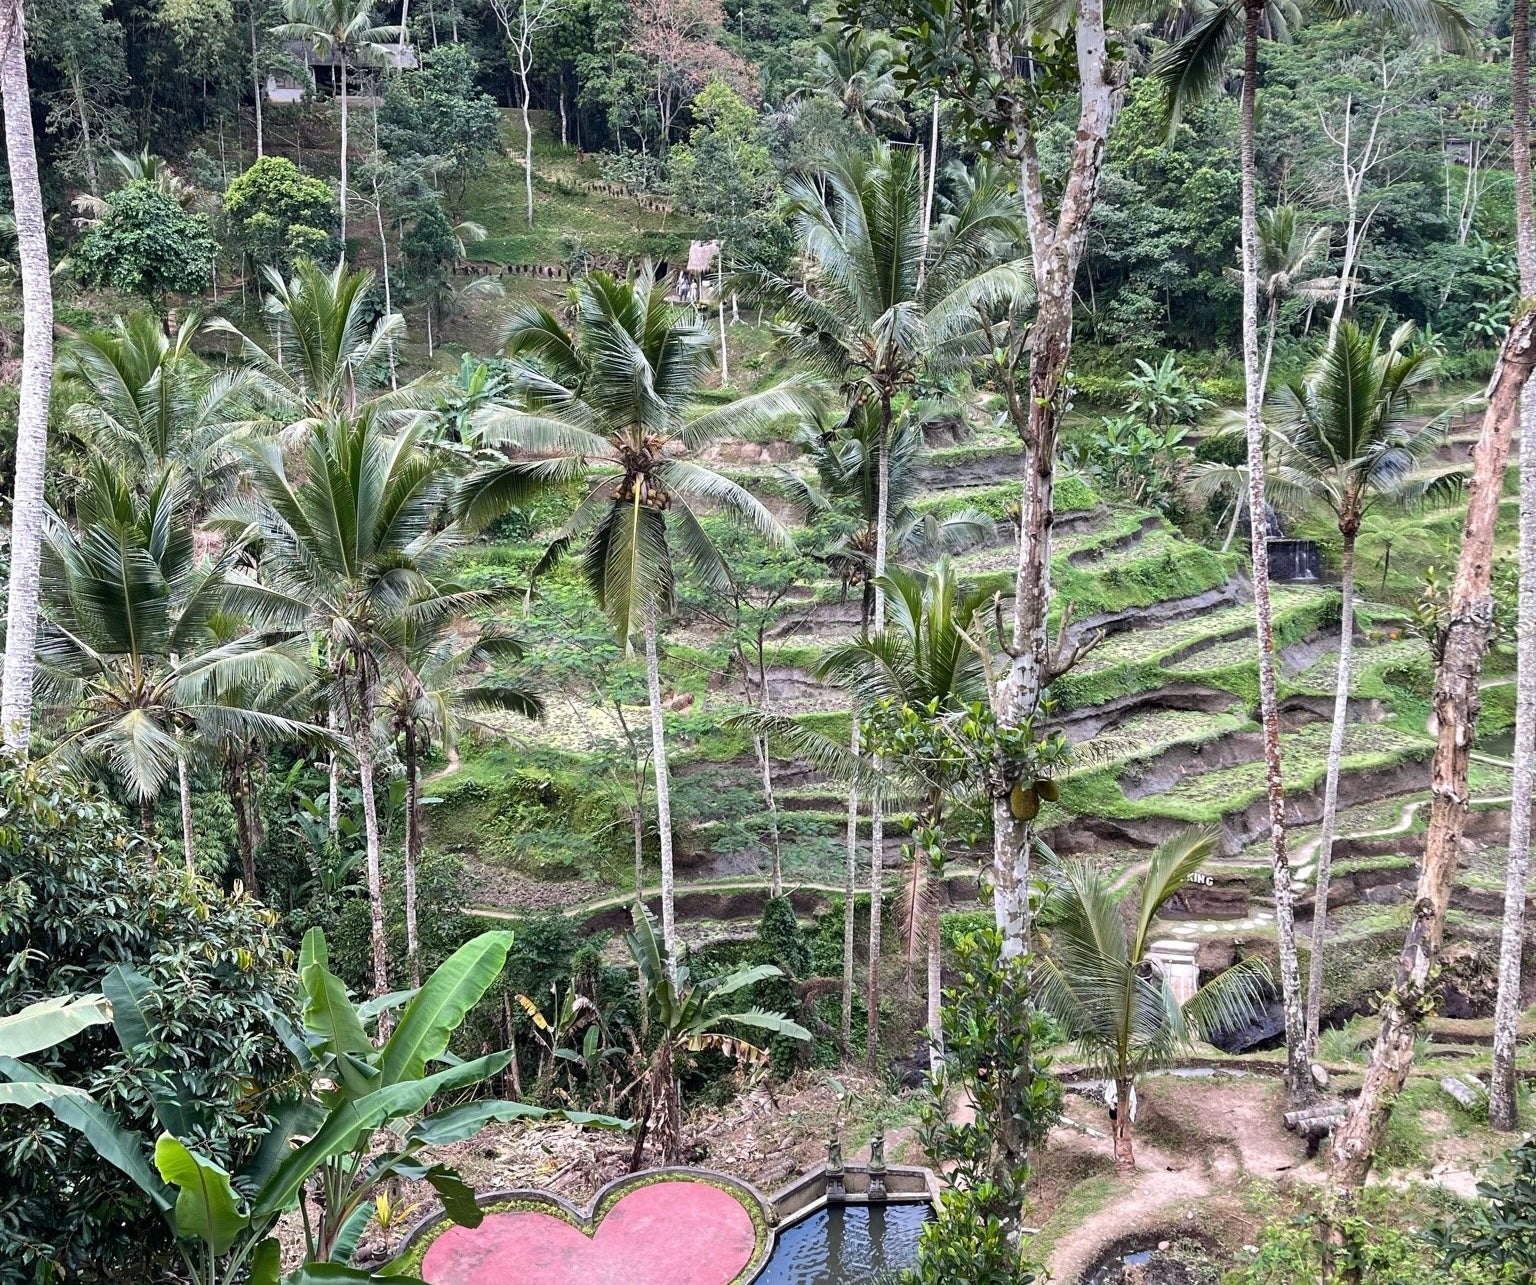 rice fields surrounding this small pond with a heart carved into it